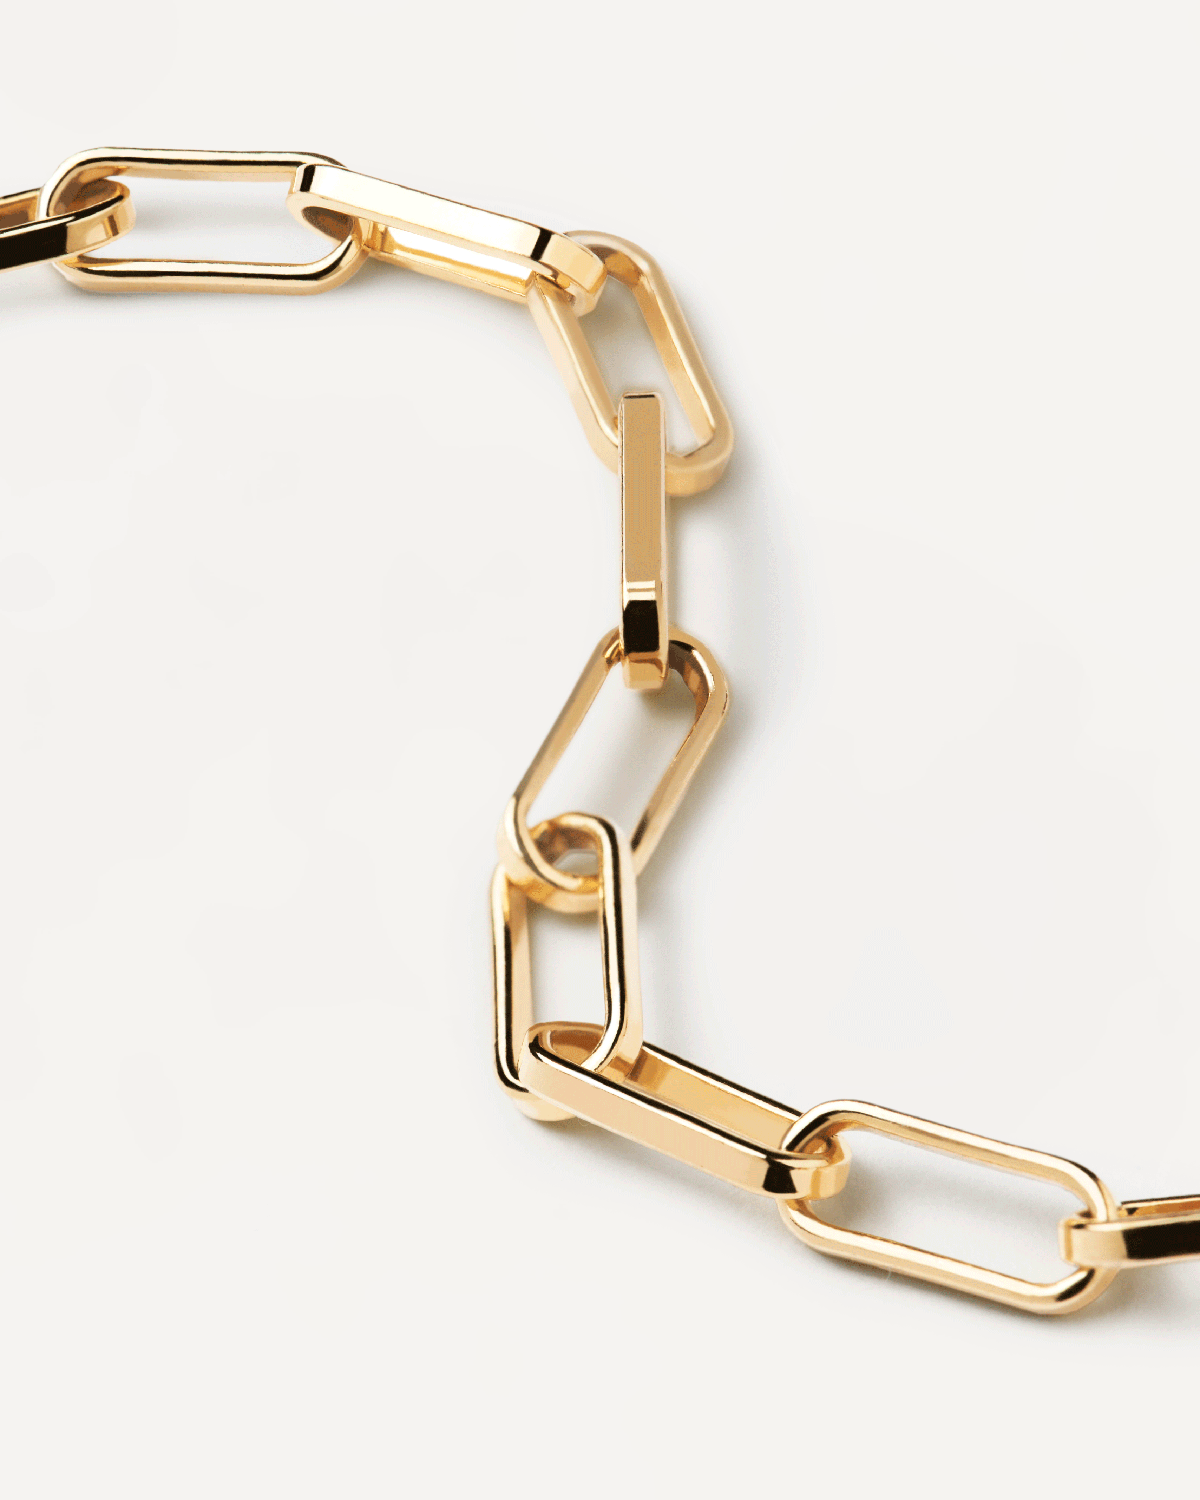 2023 Selection | Statement Bracelet. 18k gold plated silver paperclip oval-link chain bracelet and a brand tag. Get the latest arrival from PDPAOLA. Place your order safely and get this Best Seller. Free Shipping.